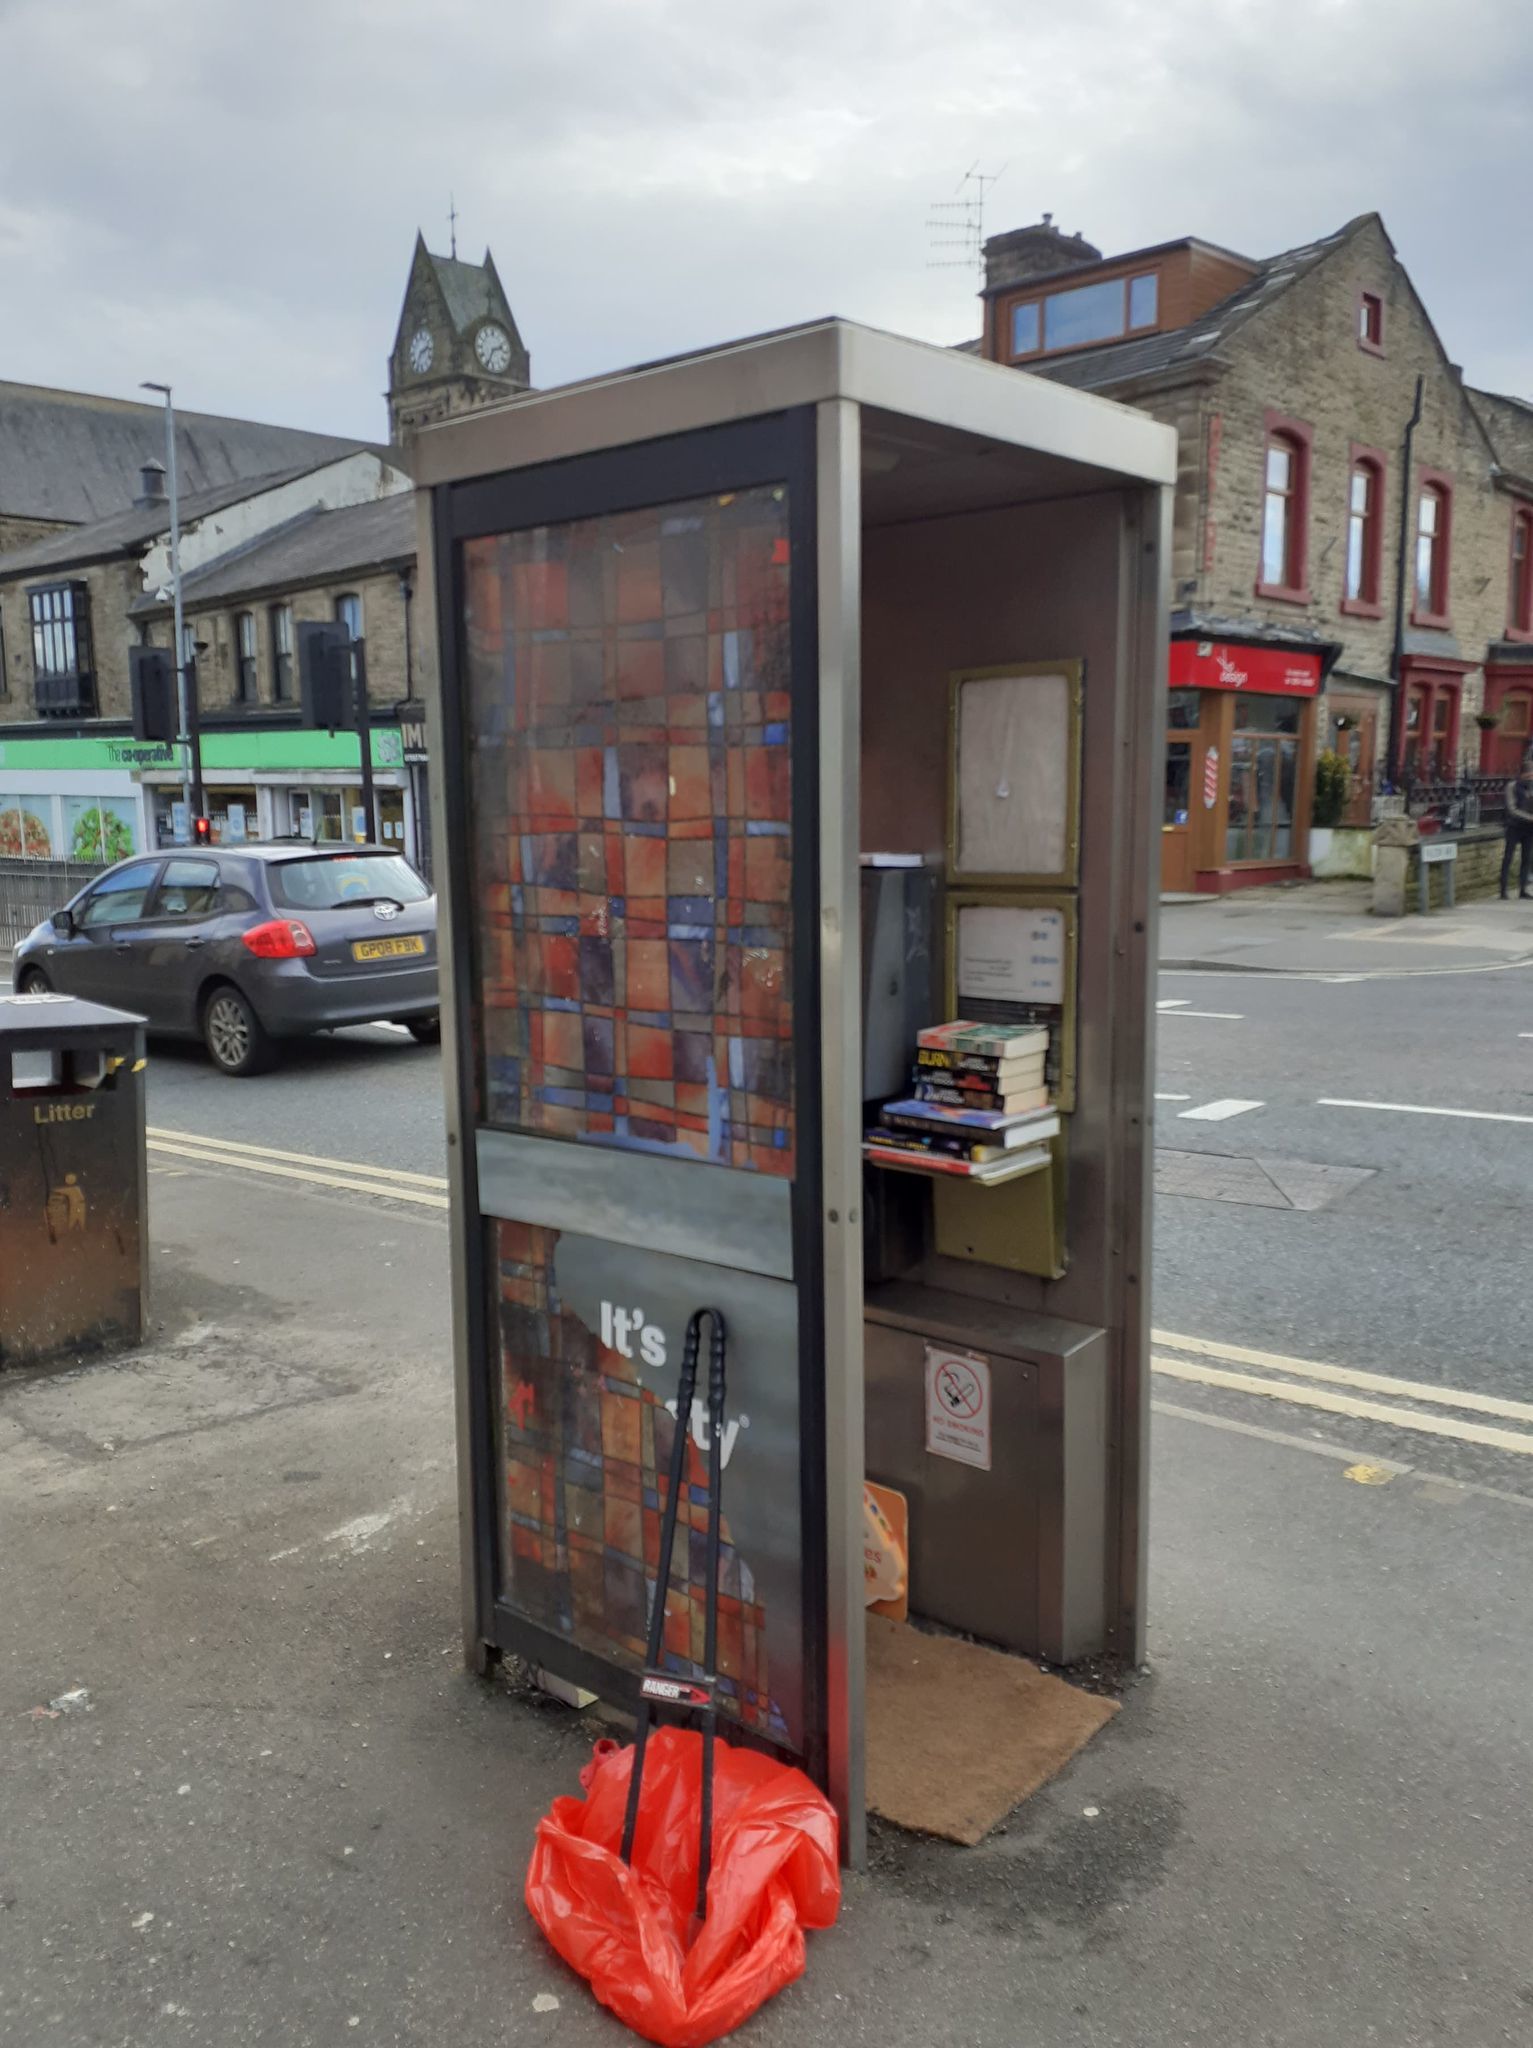 Wayne Dixon has transformed the old phone box in Darwen into a mini library